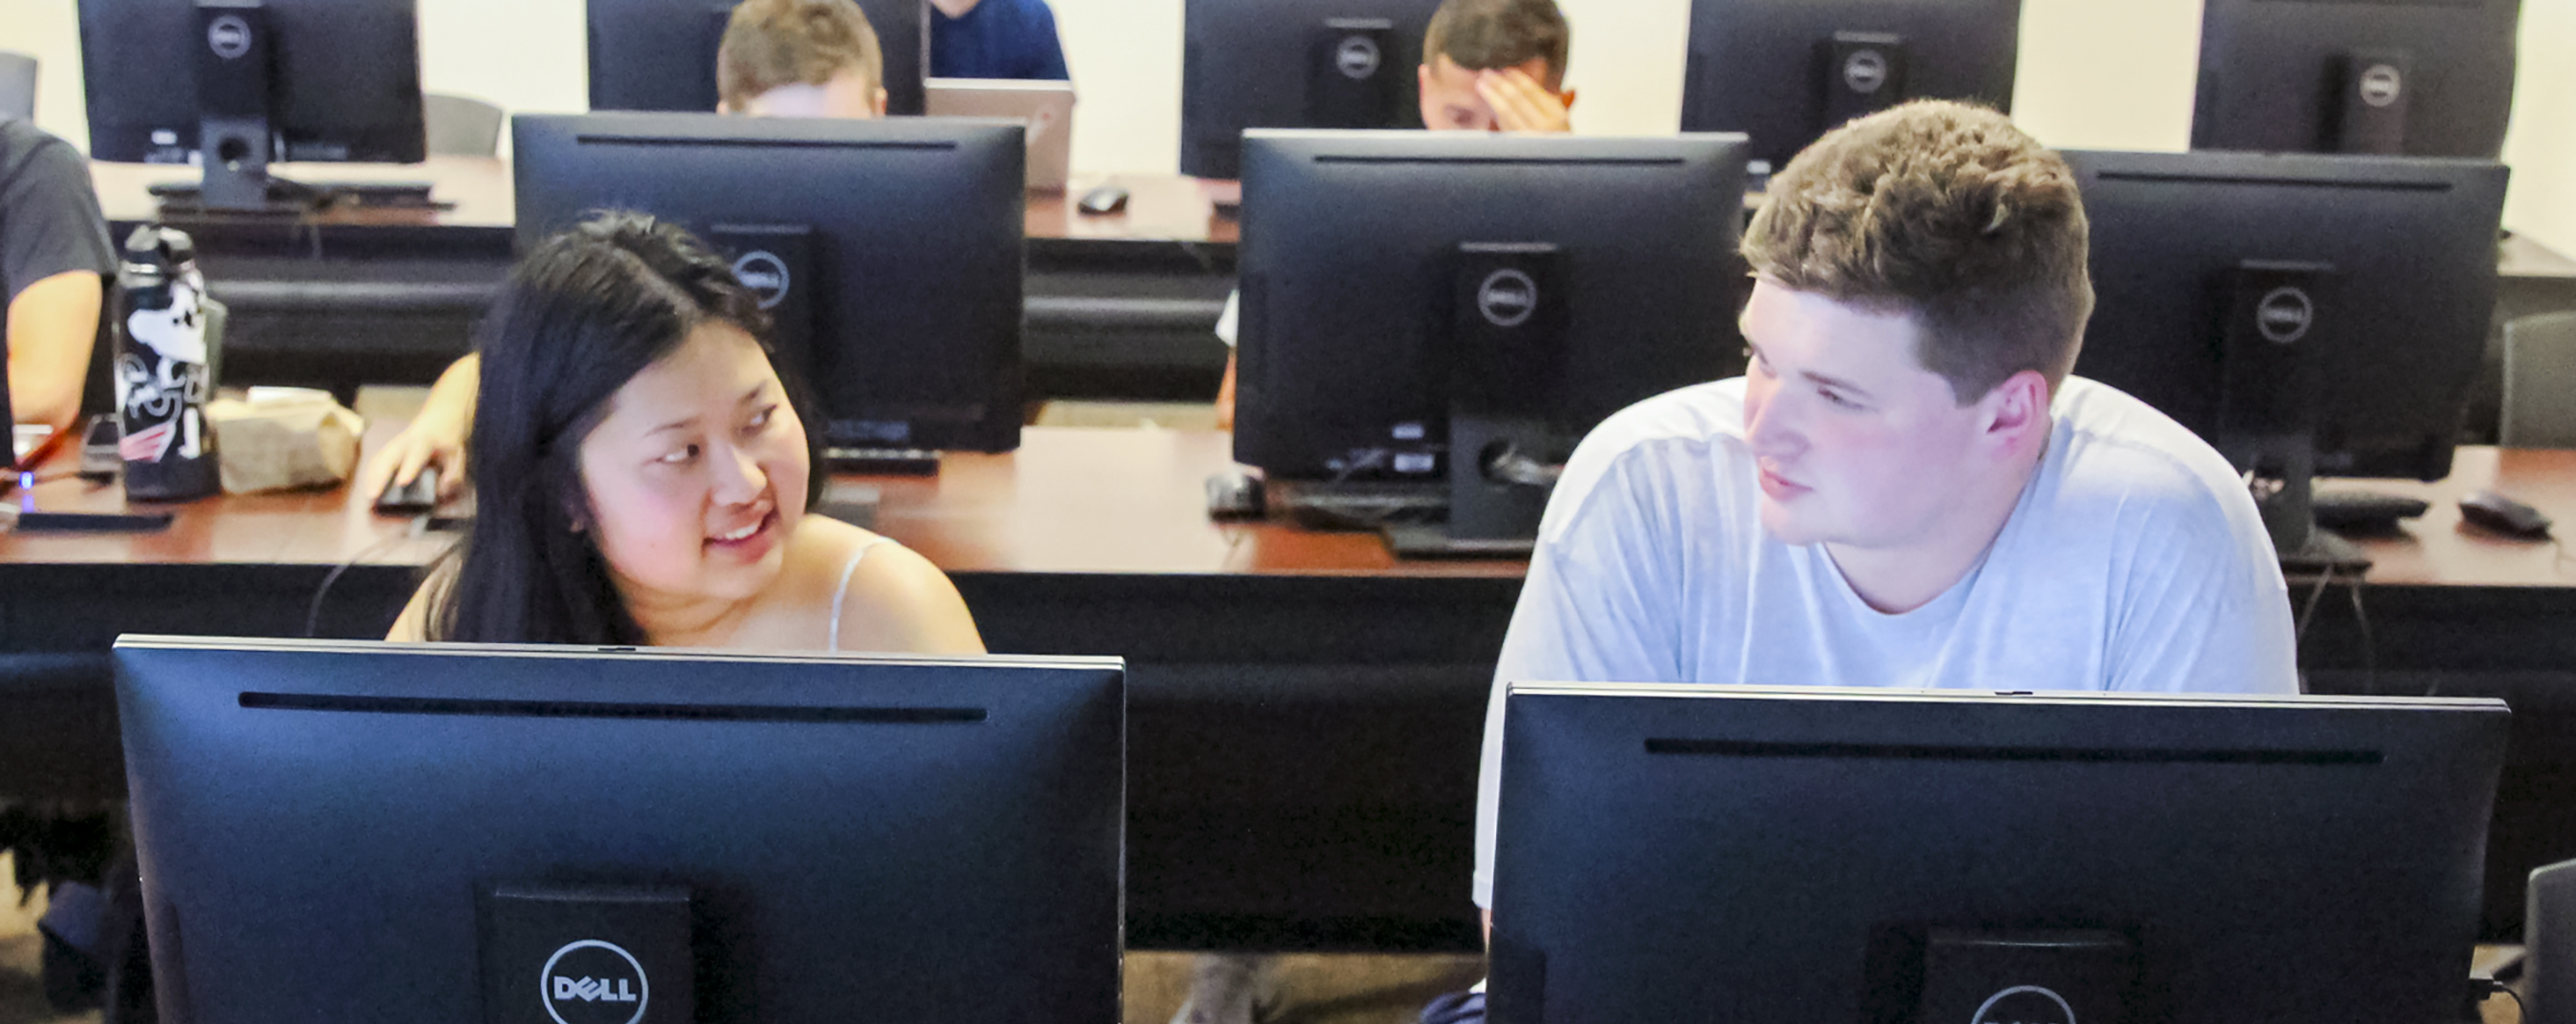 A male and female student work together in a computer lab